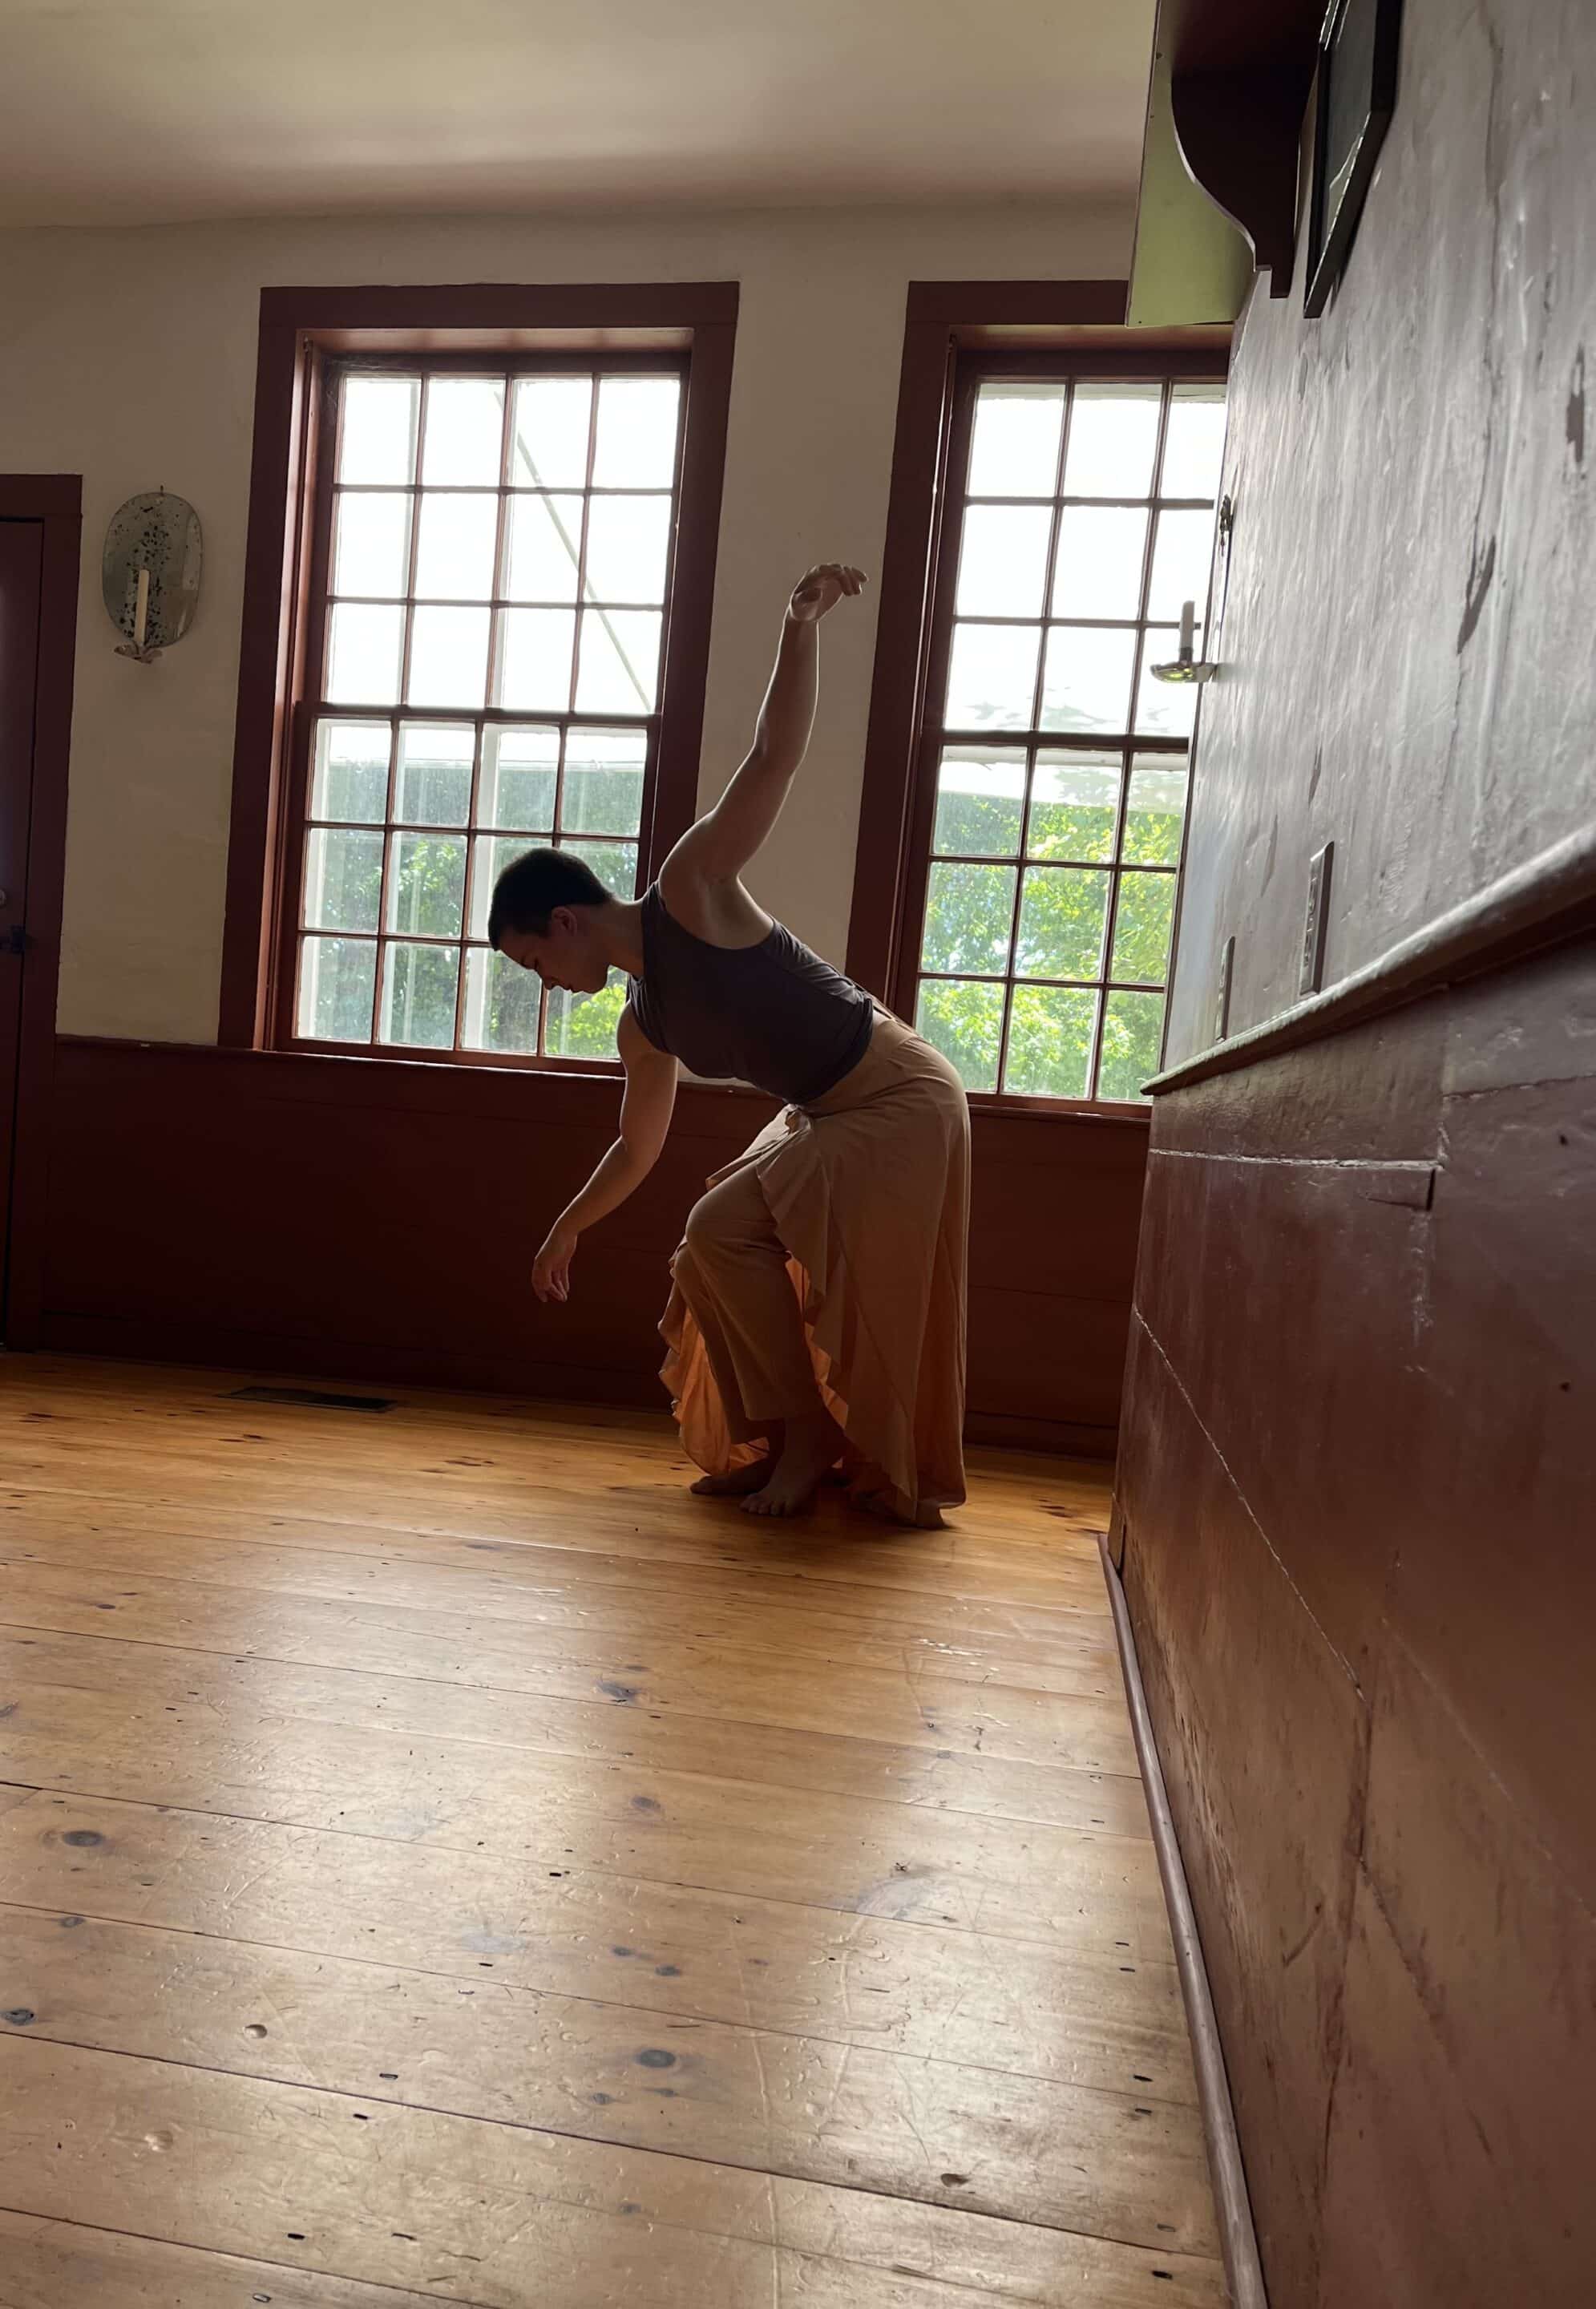 (Solo dancer Katie Corkcum in “Not my mother’s pious daughter” performance at The Samuel Reed Hall House, photo by Adelle Brunstad)